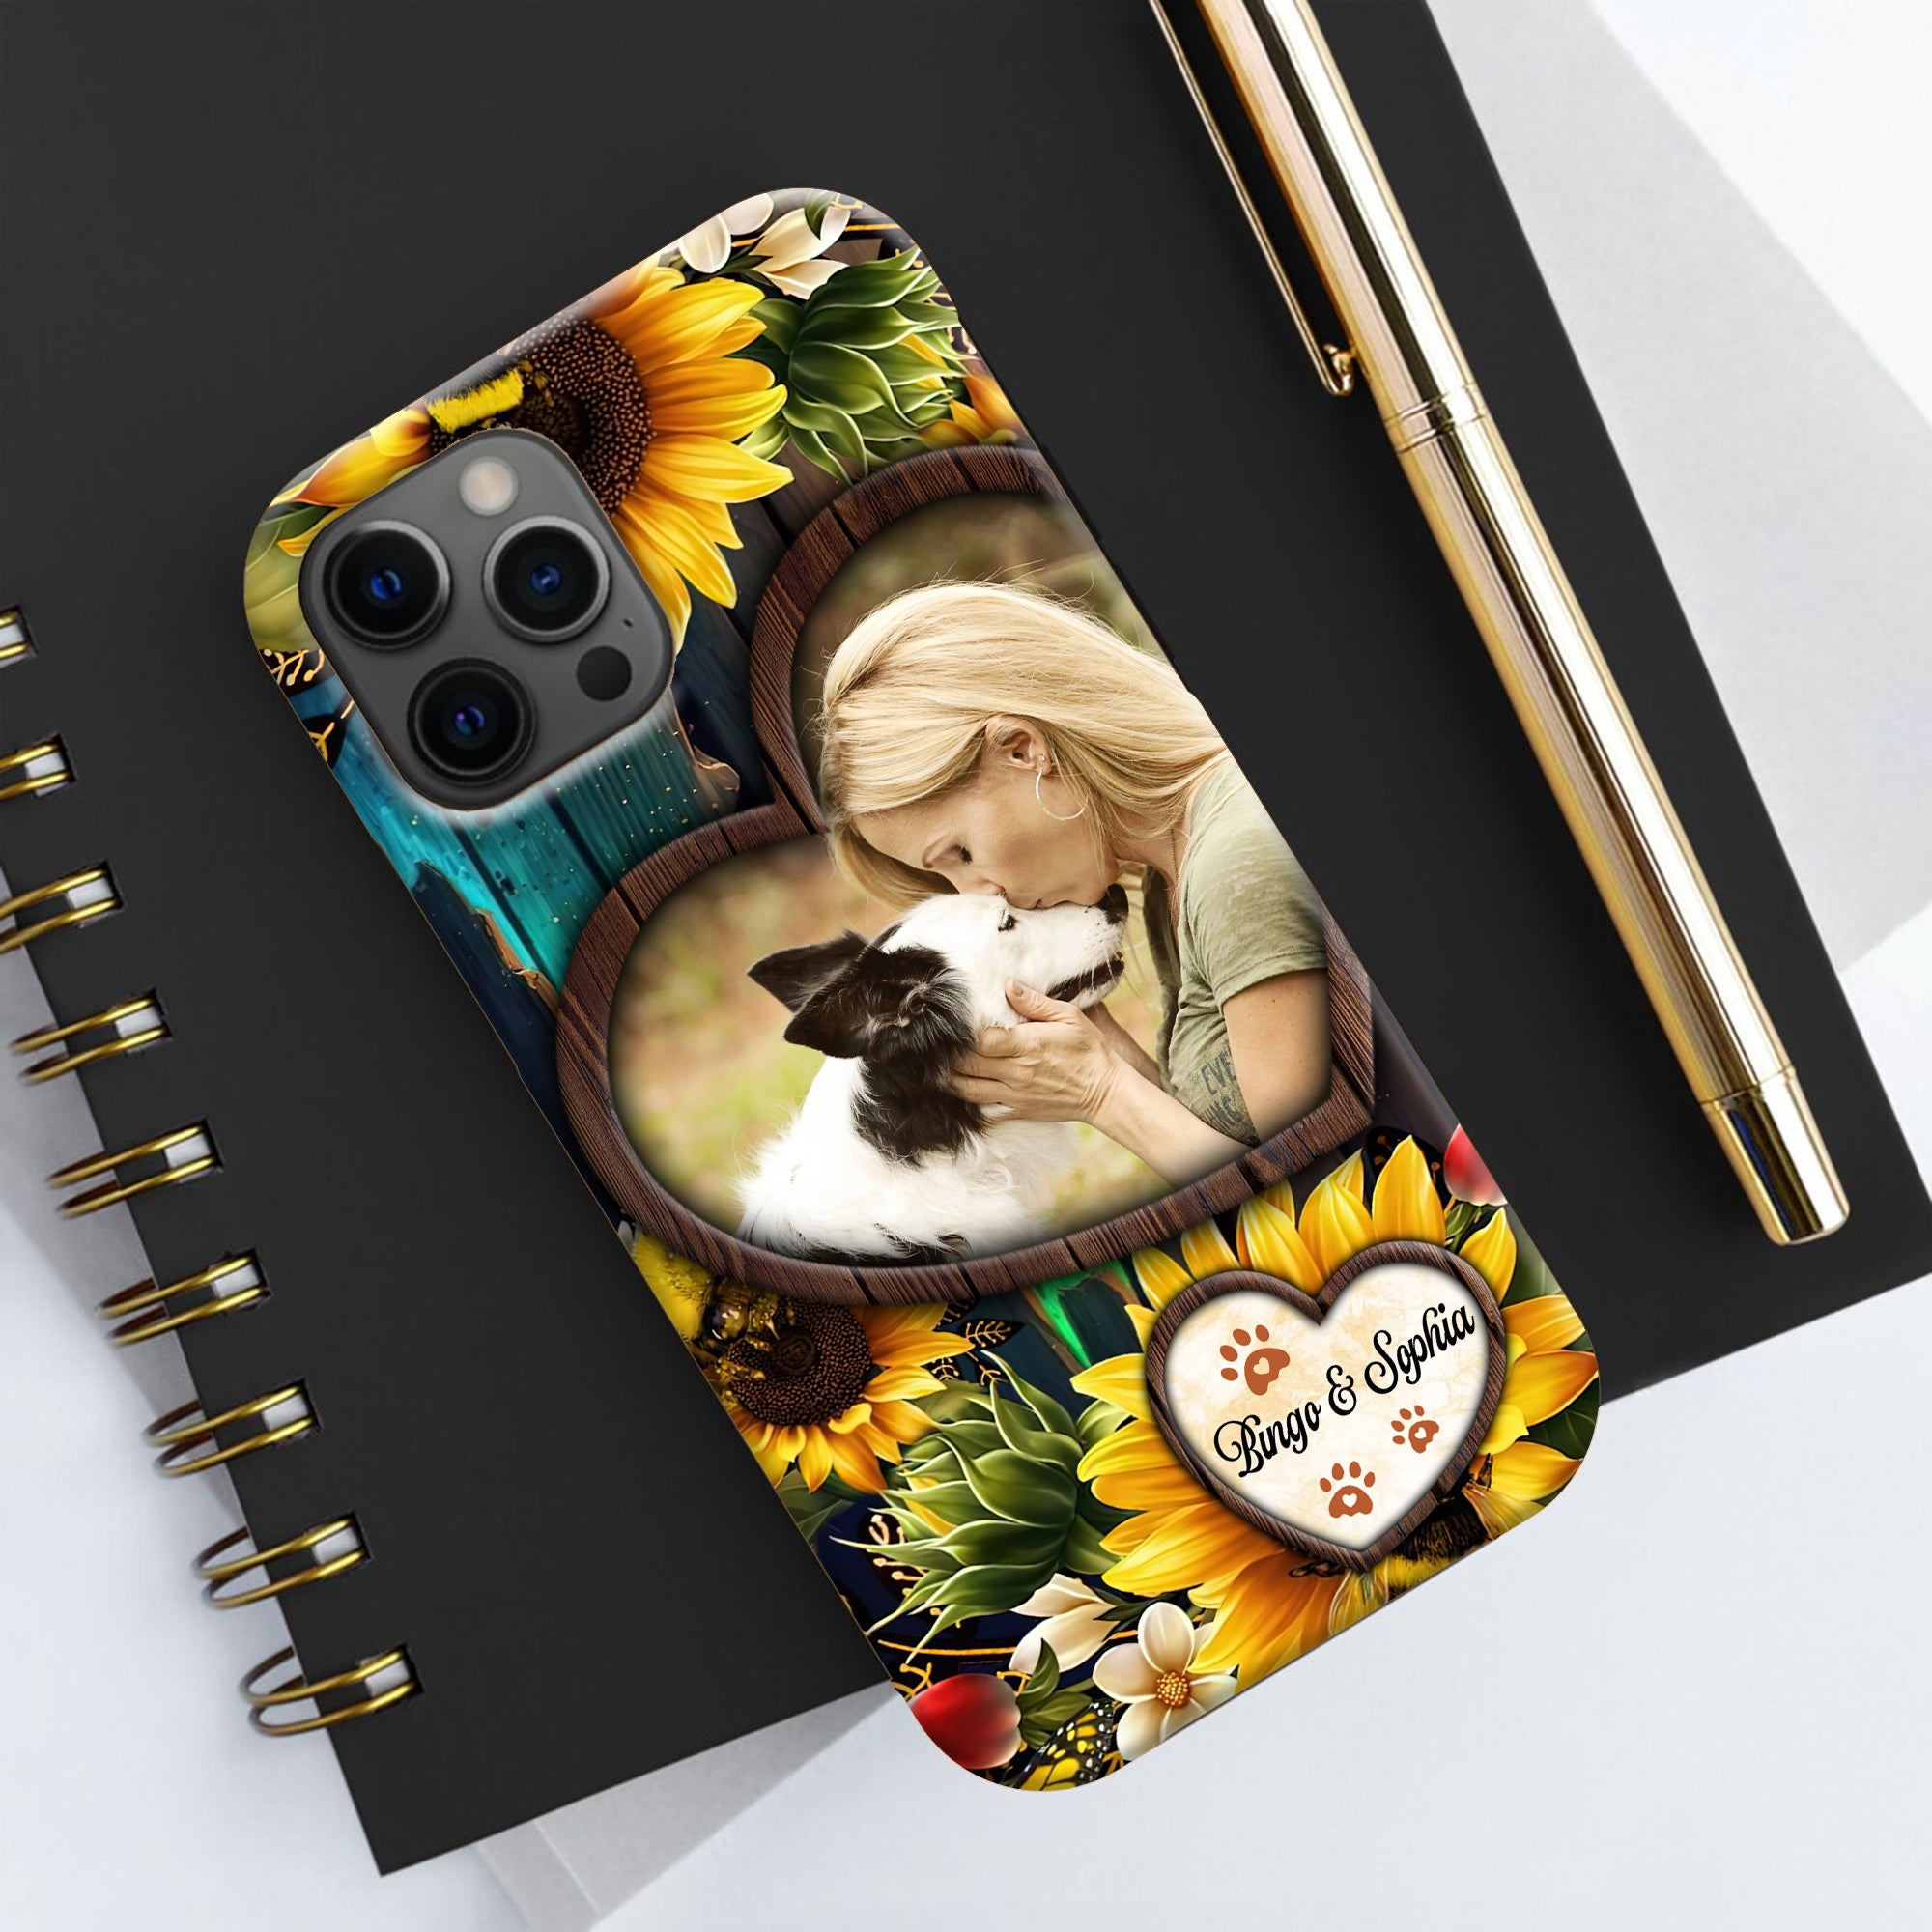 Sunflower Heart And Paw - Custom Photo And Name - Personalized Phone Case, Family Gift, Gift For Pet Lover